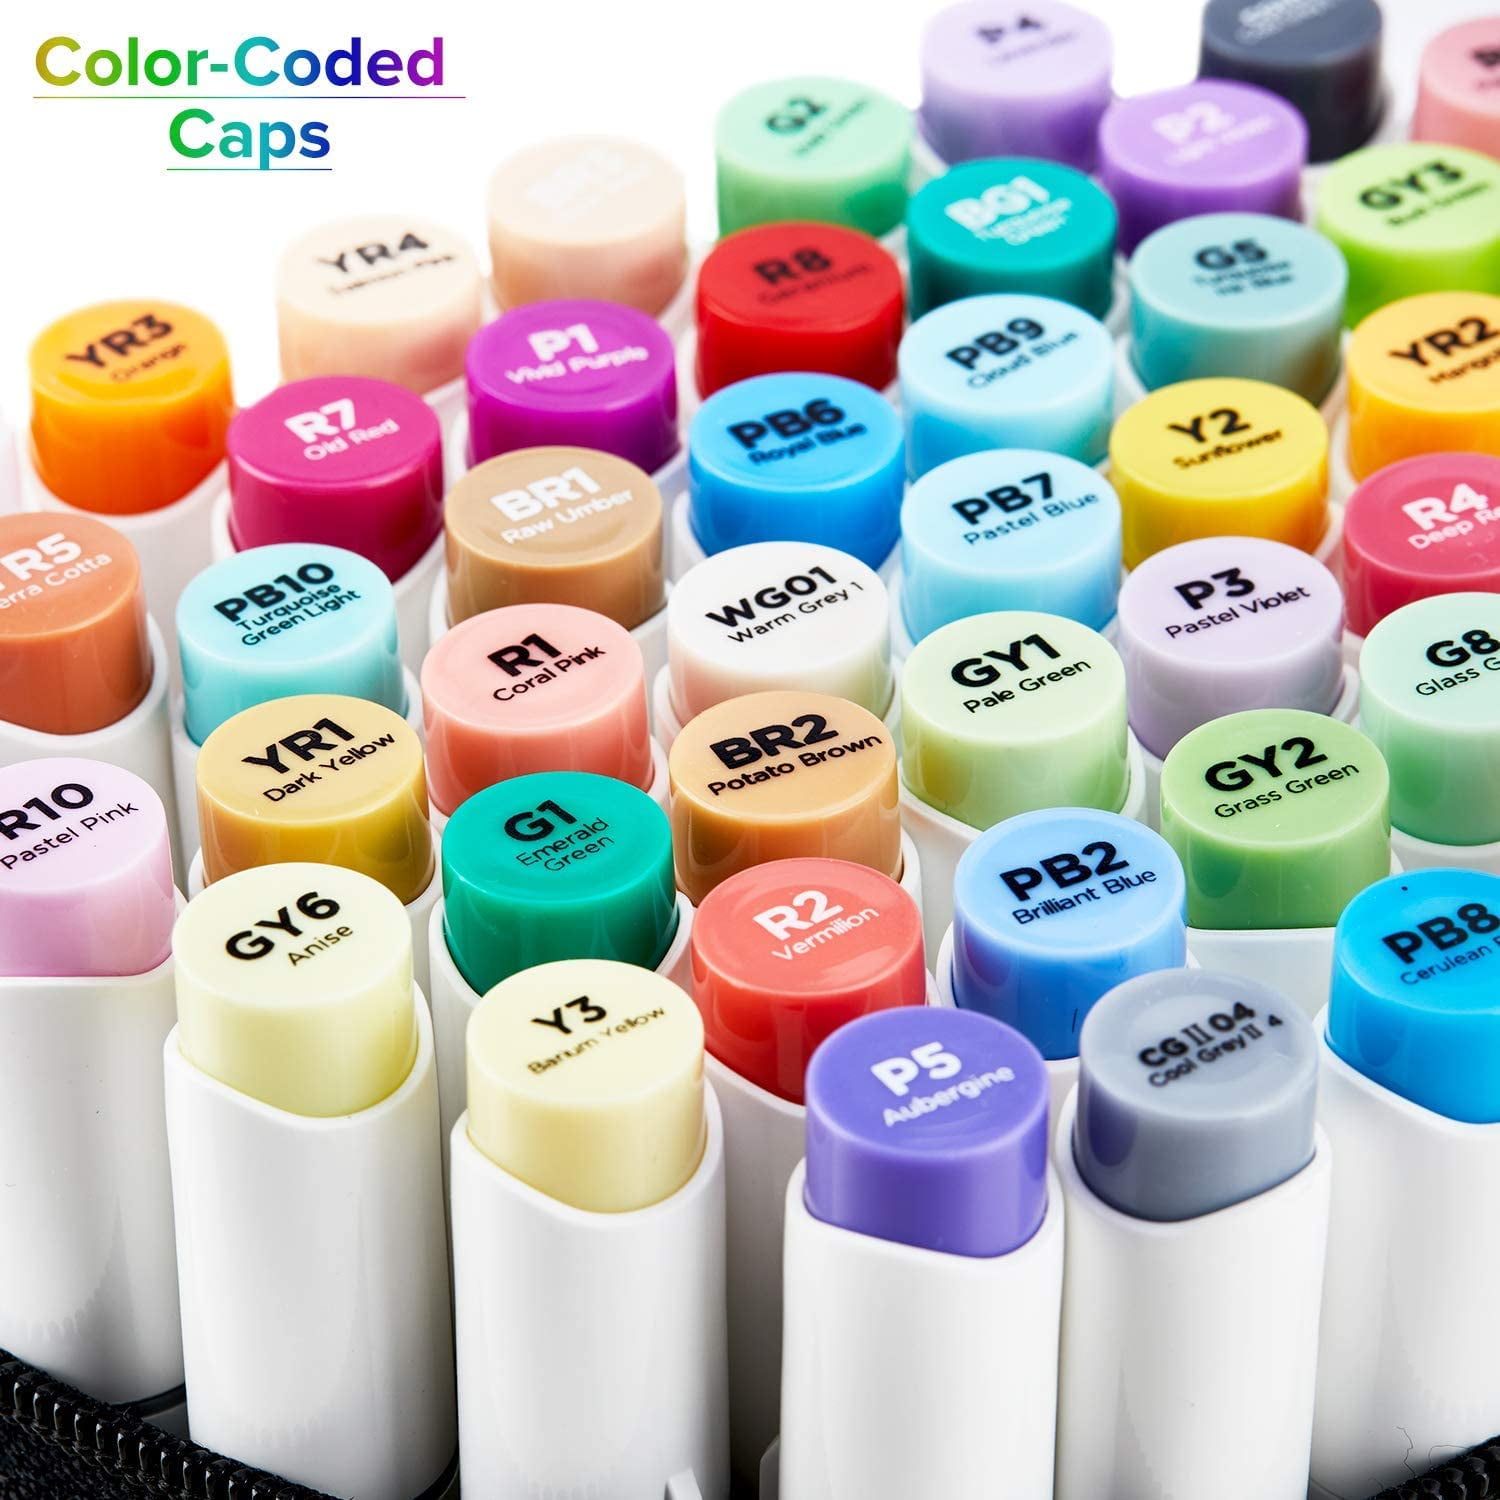 OHUHU Ohuhu Markers for Adult Coloring Books: 160 Colors Coloring